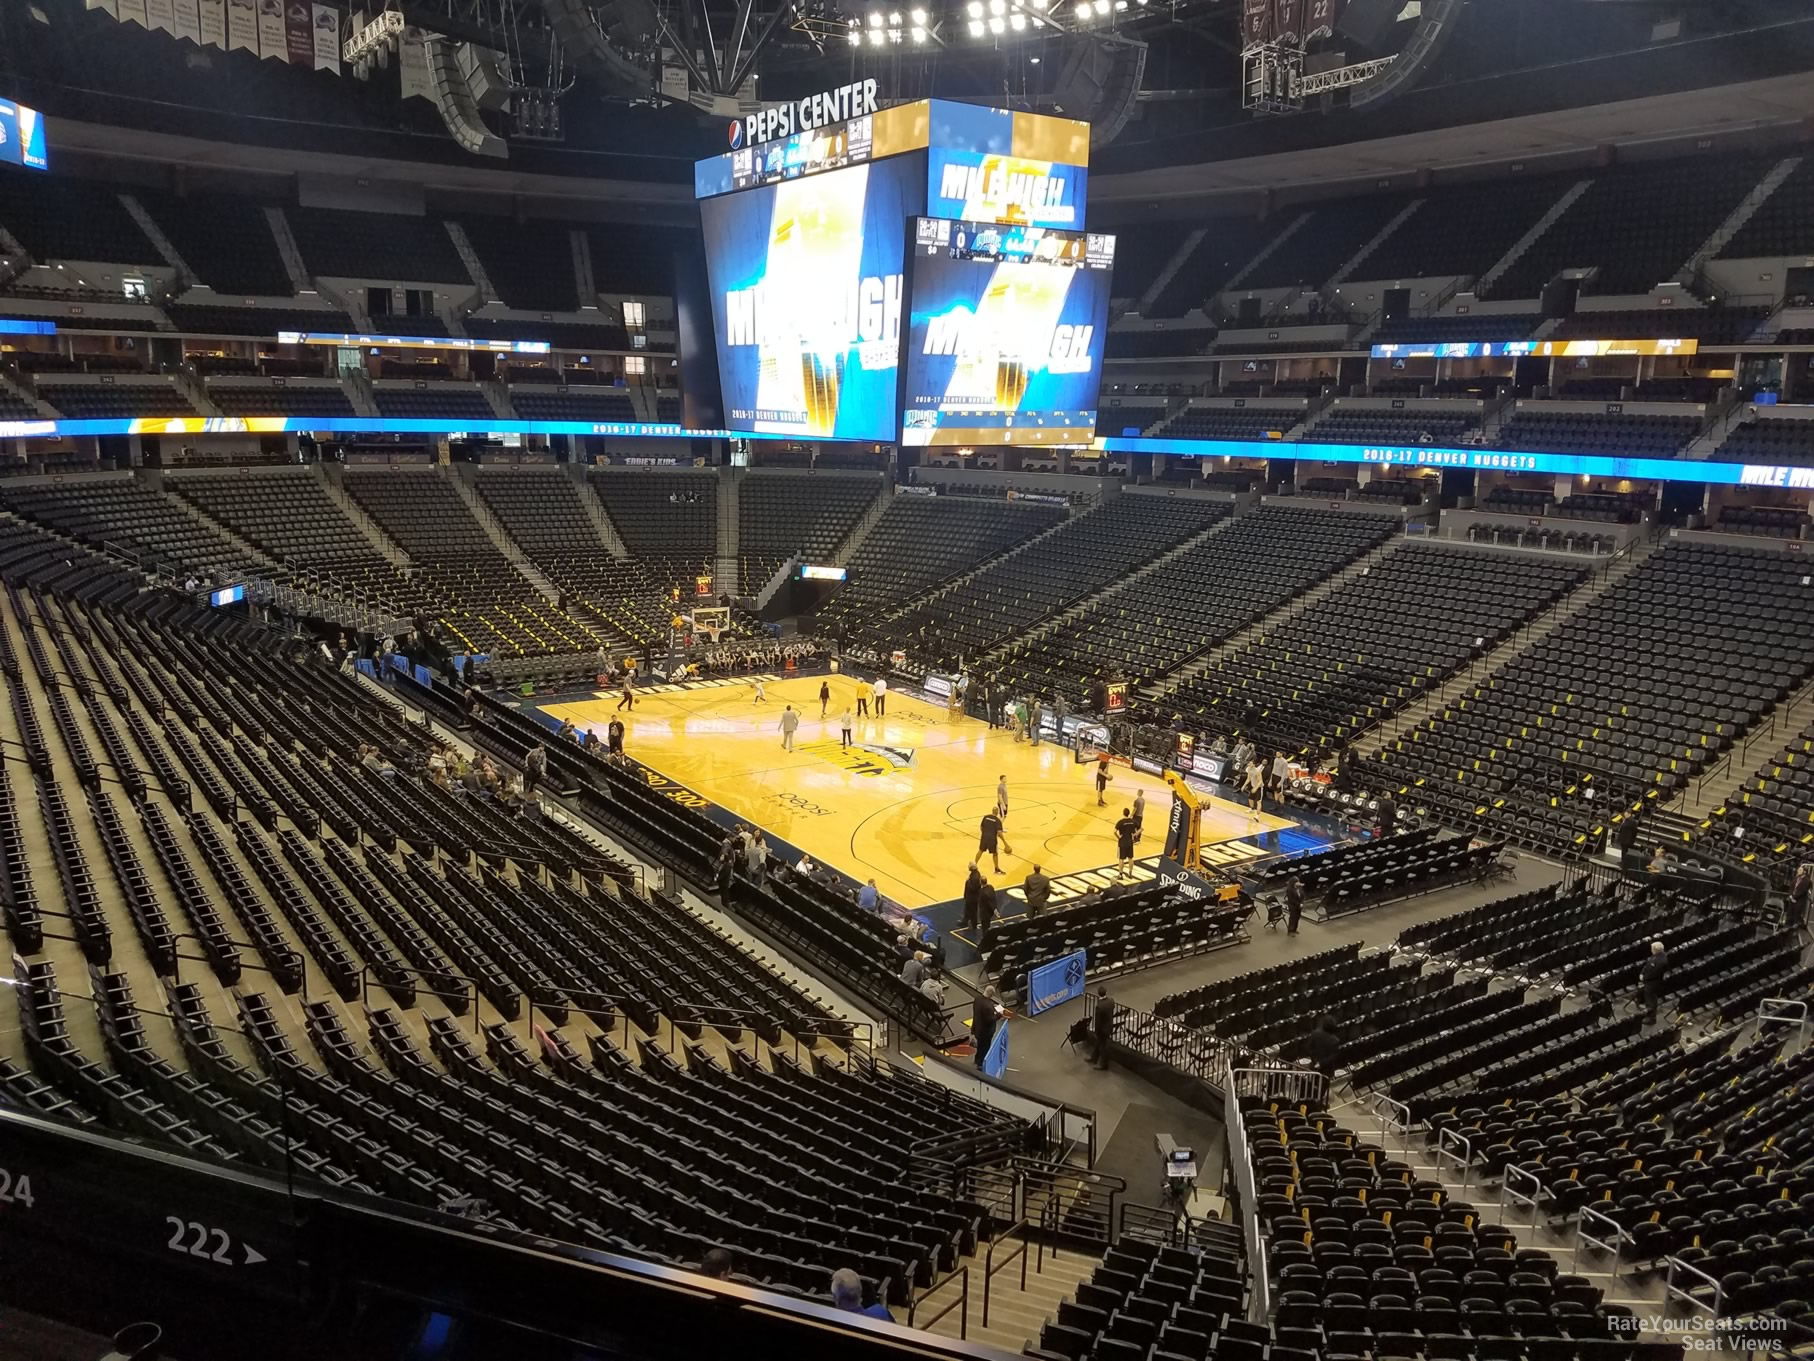 section 222, row 4 seat view  for basketball - ball arena